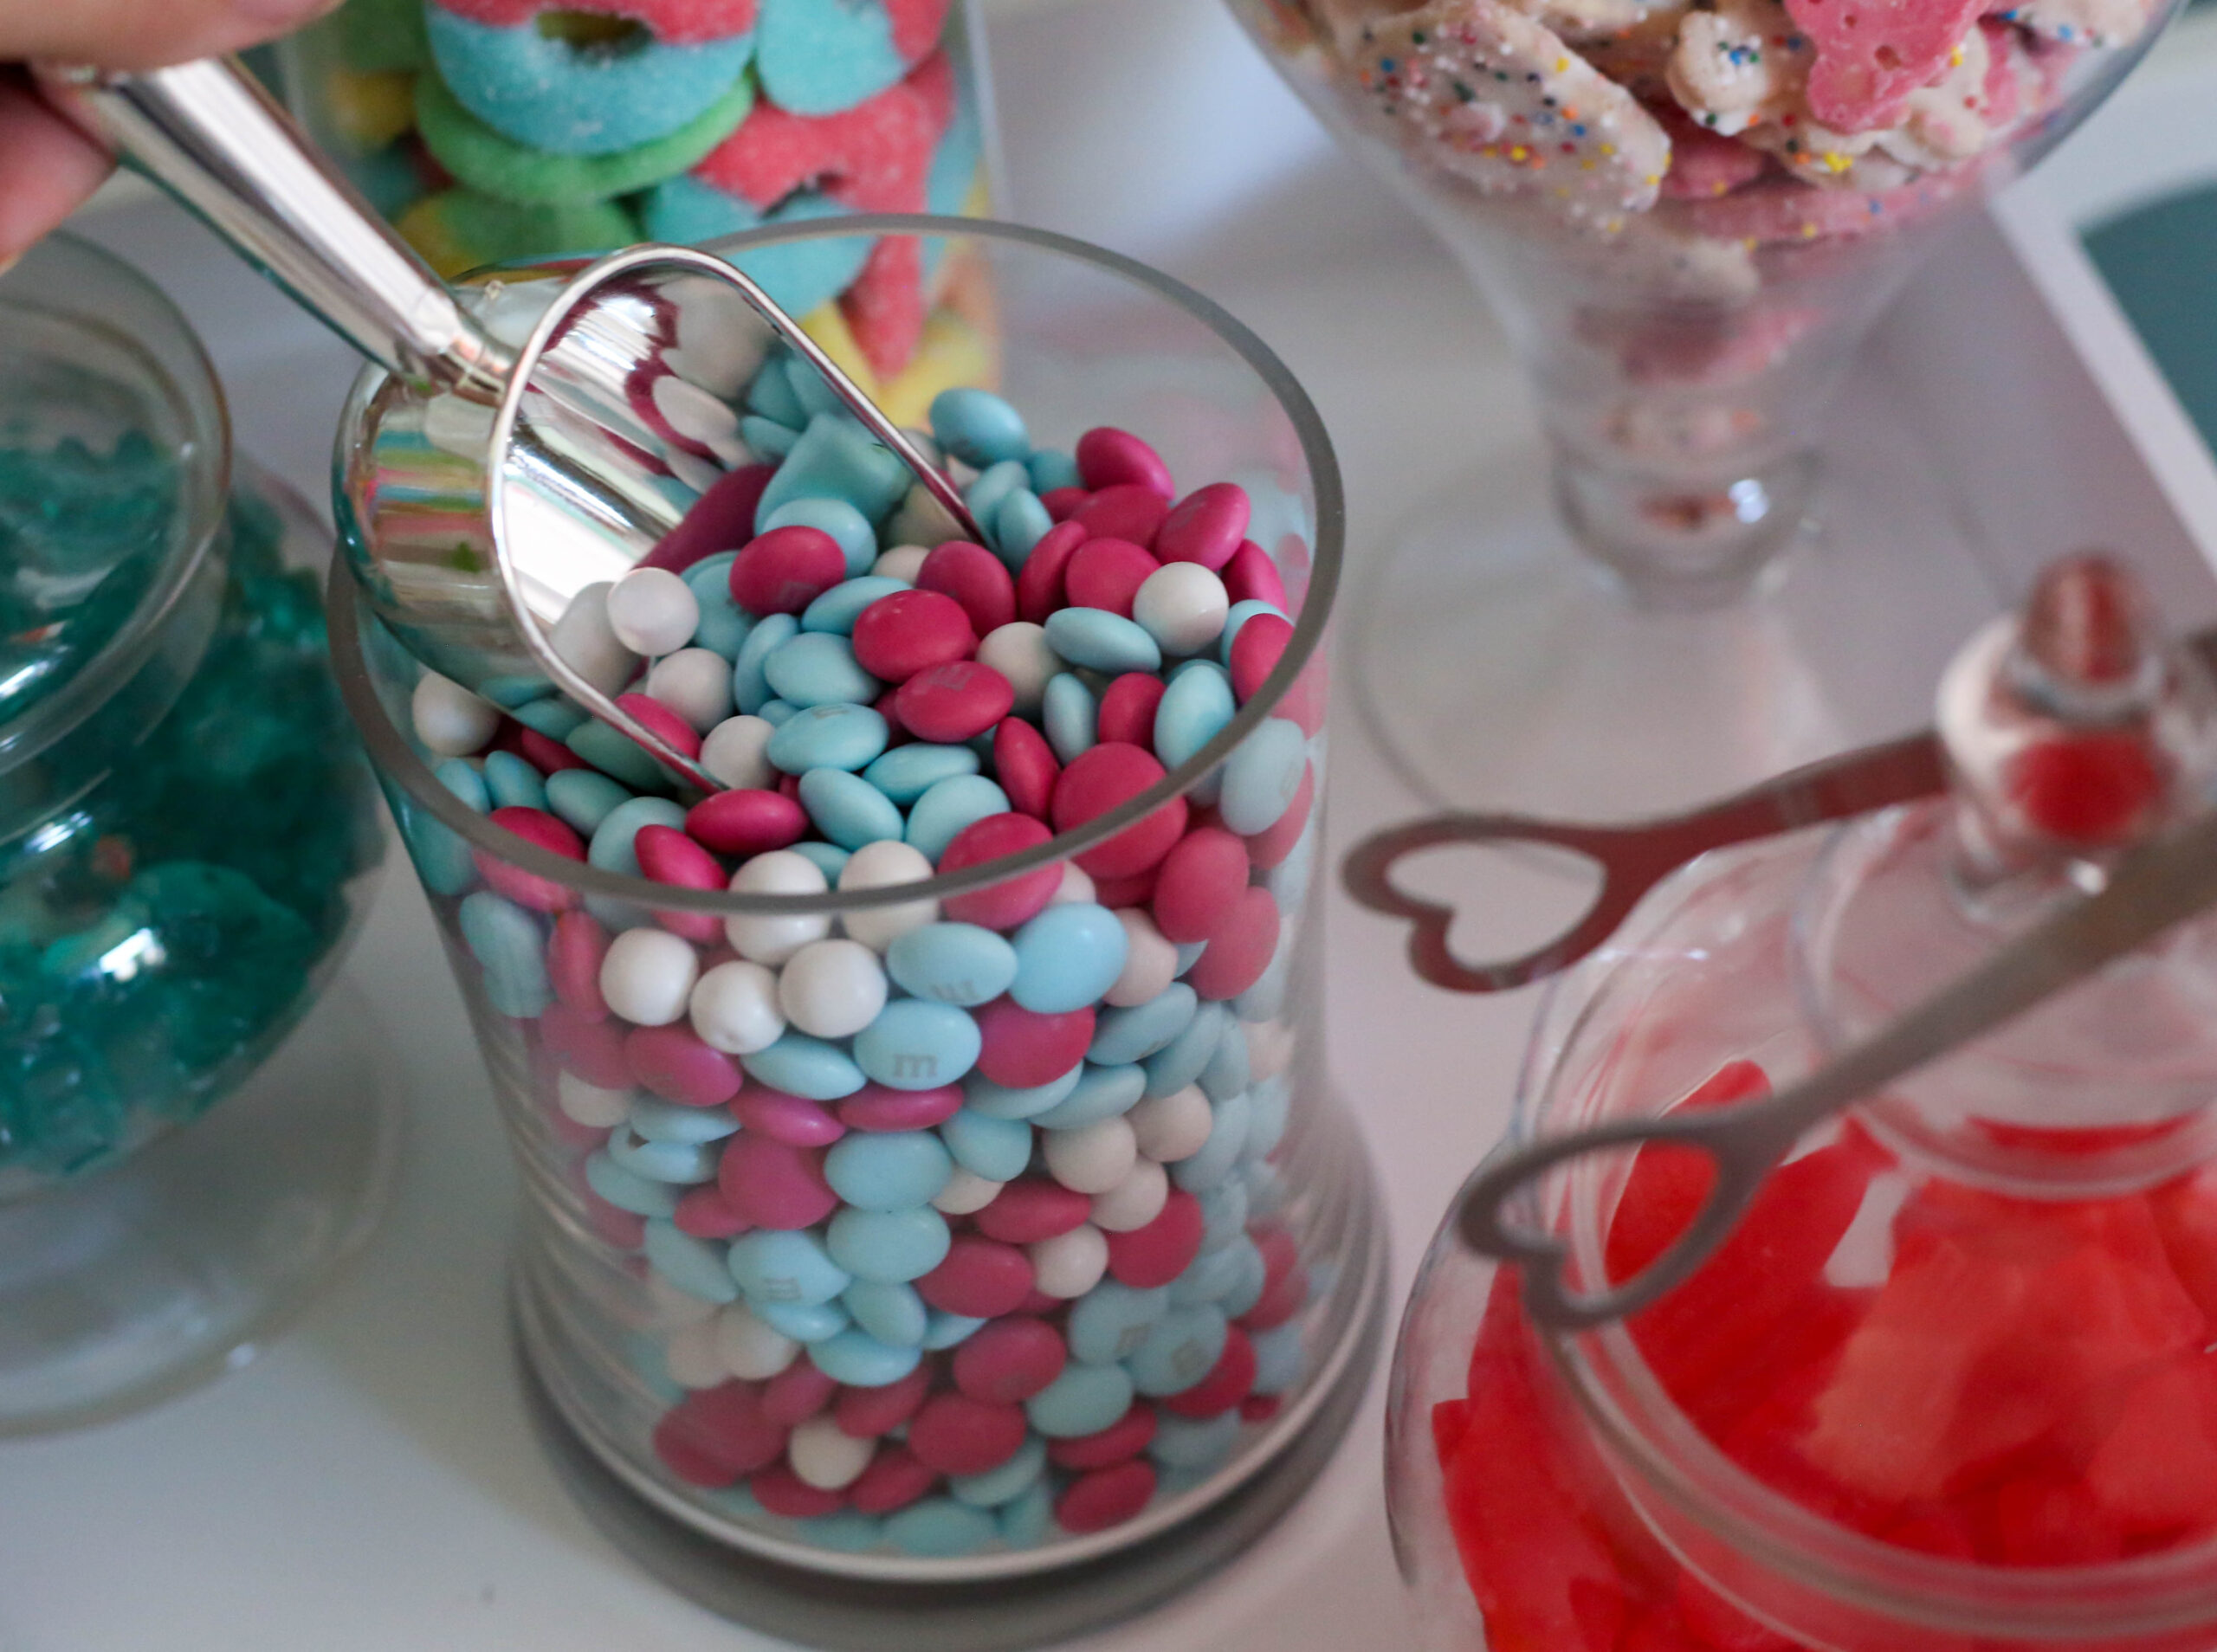 m&ms candy at a candy theme party in a glass candy jar with silvertone scoop